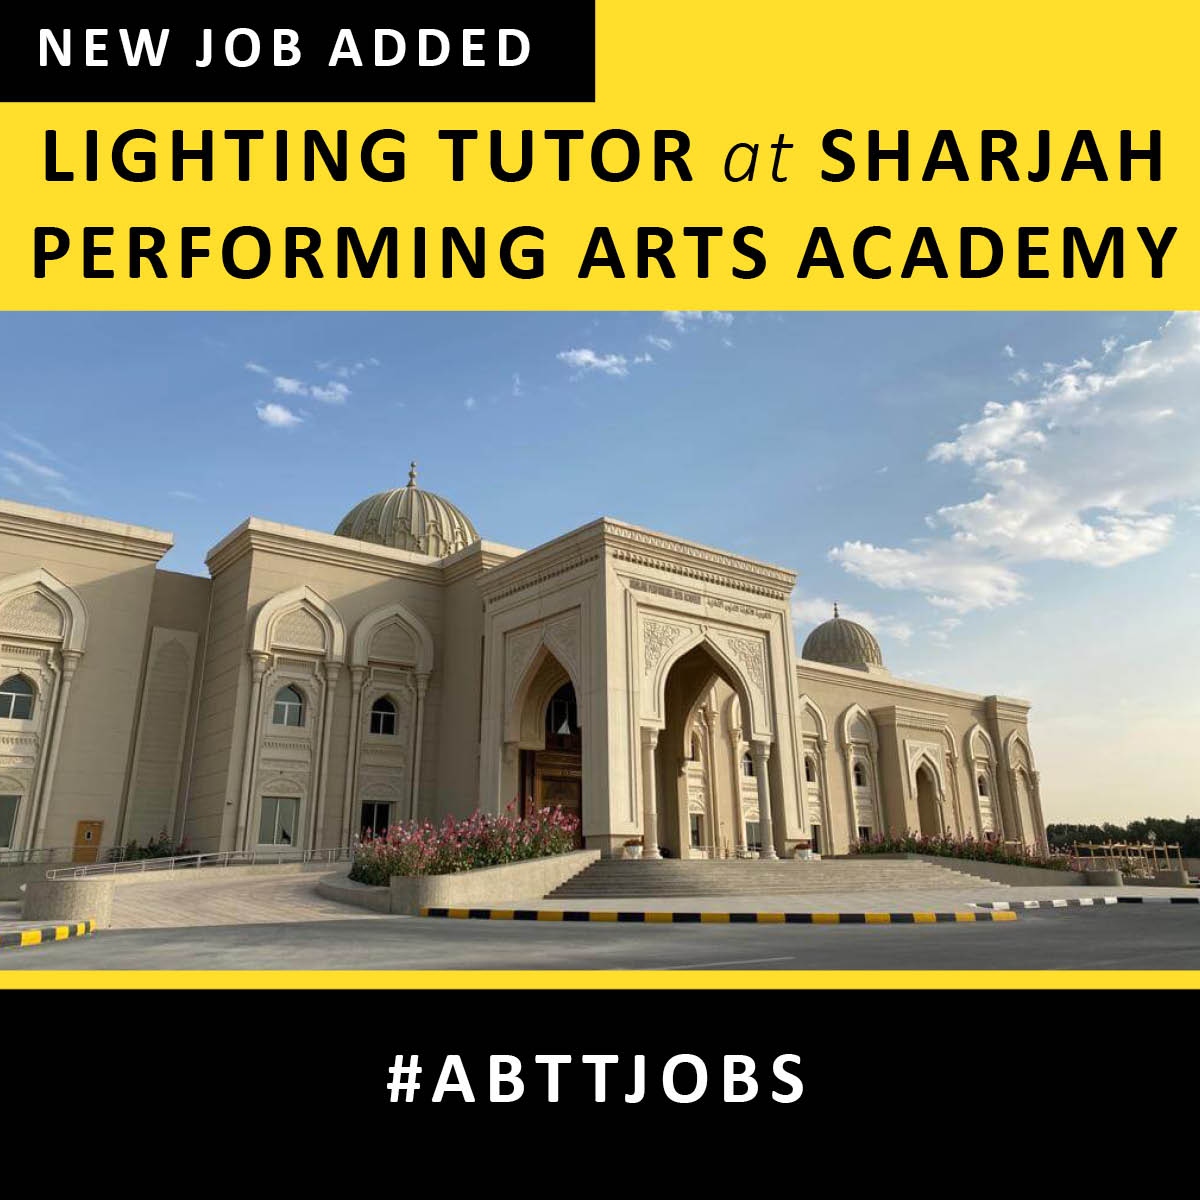 Sharjah Performing Arts Academy are hiring a Lighting Tutor to join their global team based in Sharjah, United Arab Emirates.

Find out more and apply here: abtt.org.uk/jobs/lighting-…

#ABTTjobs